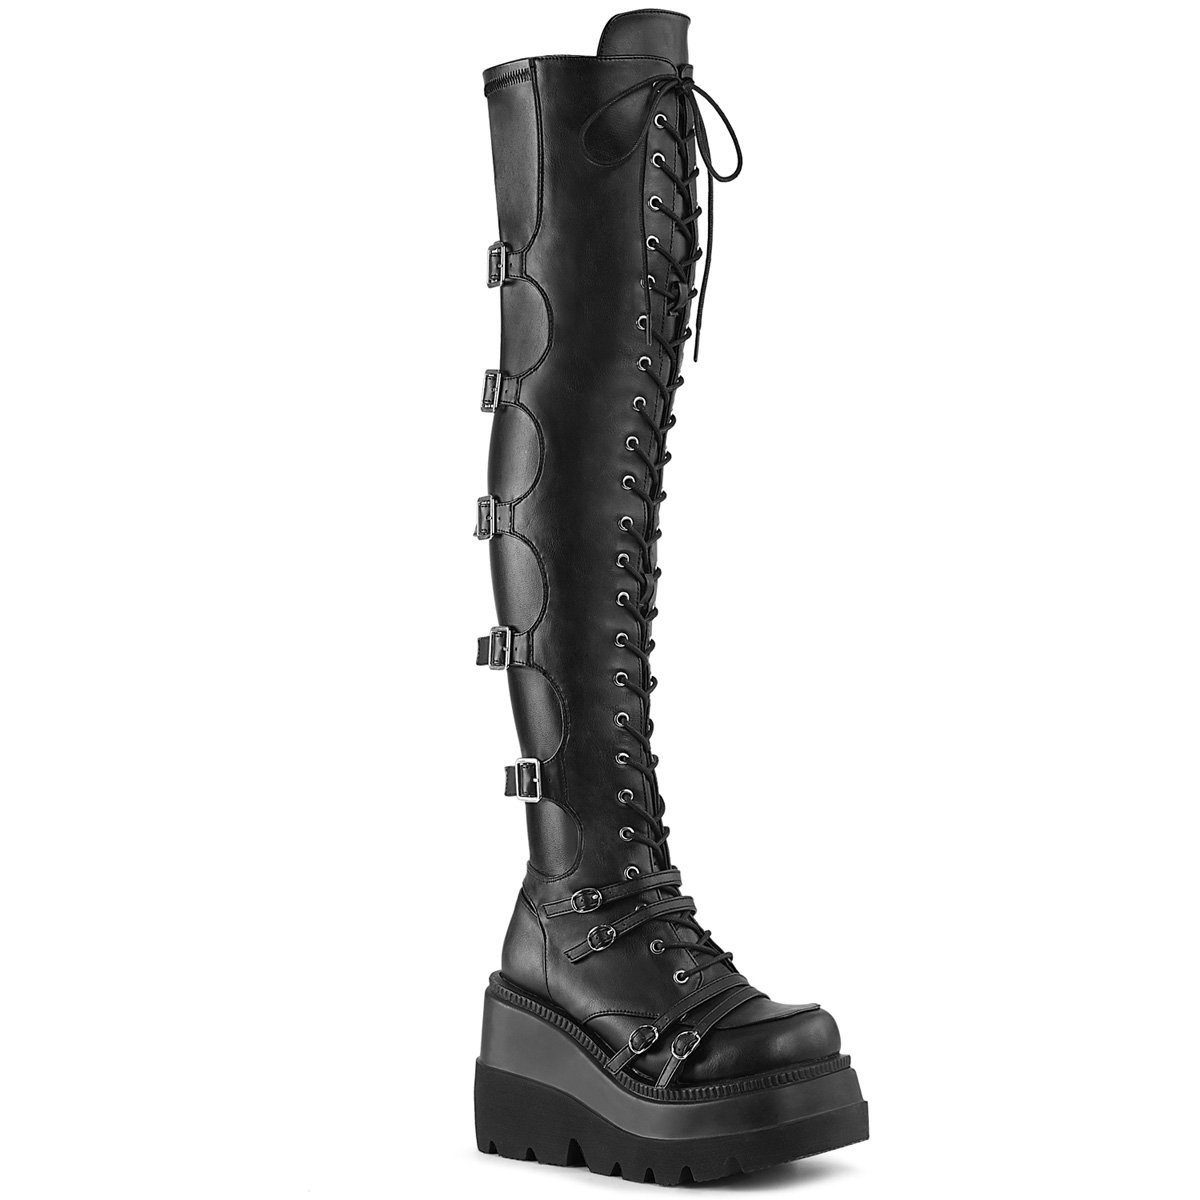 Demonia Shaker-350 Boots | Buy Sexy Shoes at Shoefreaks.ca